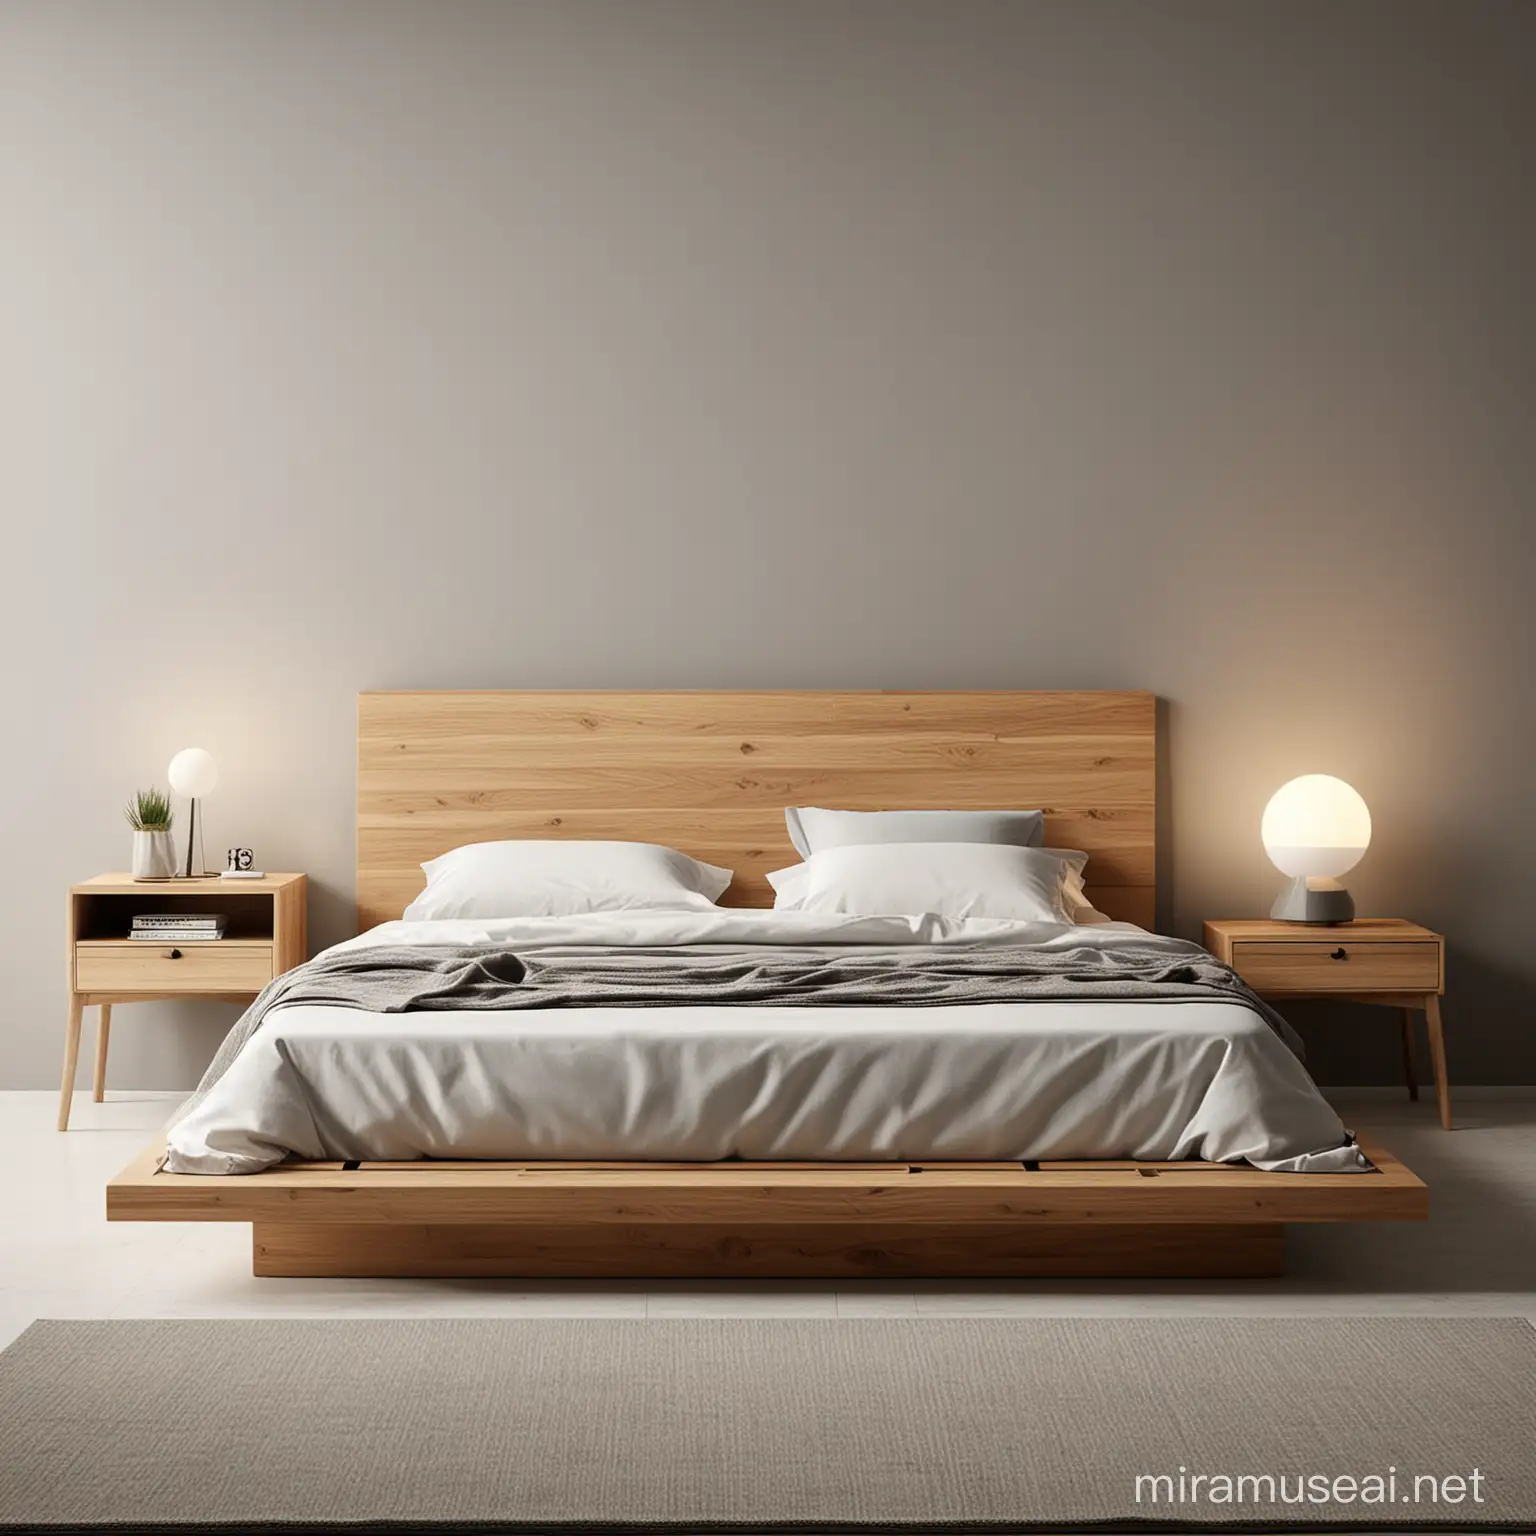 adv for home accessories with a bed in the centre, minimal style